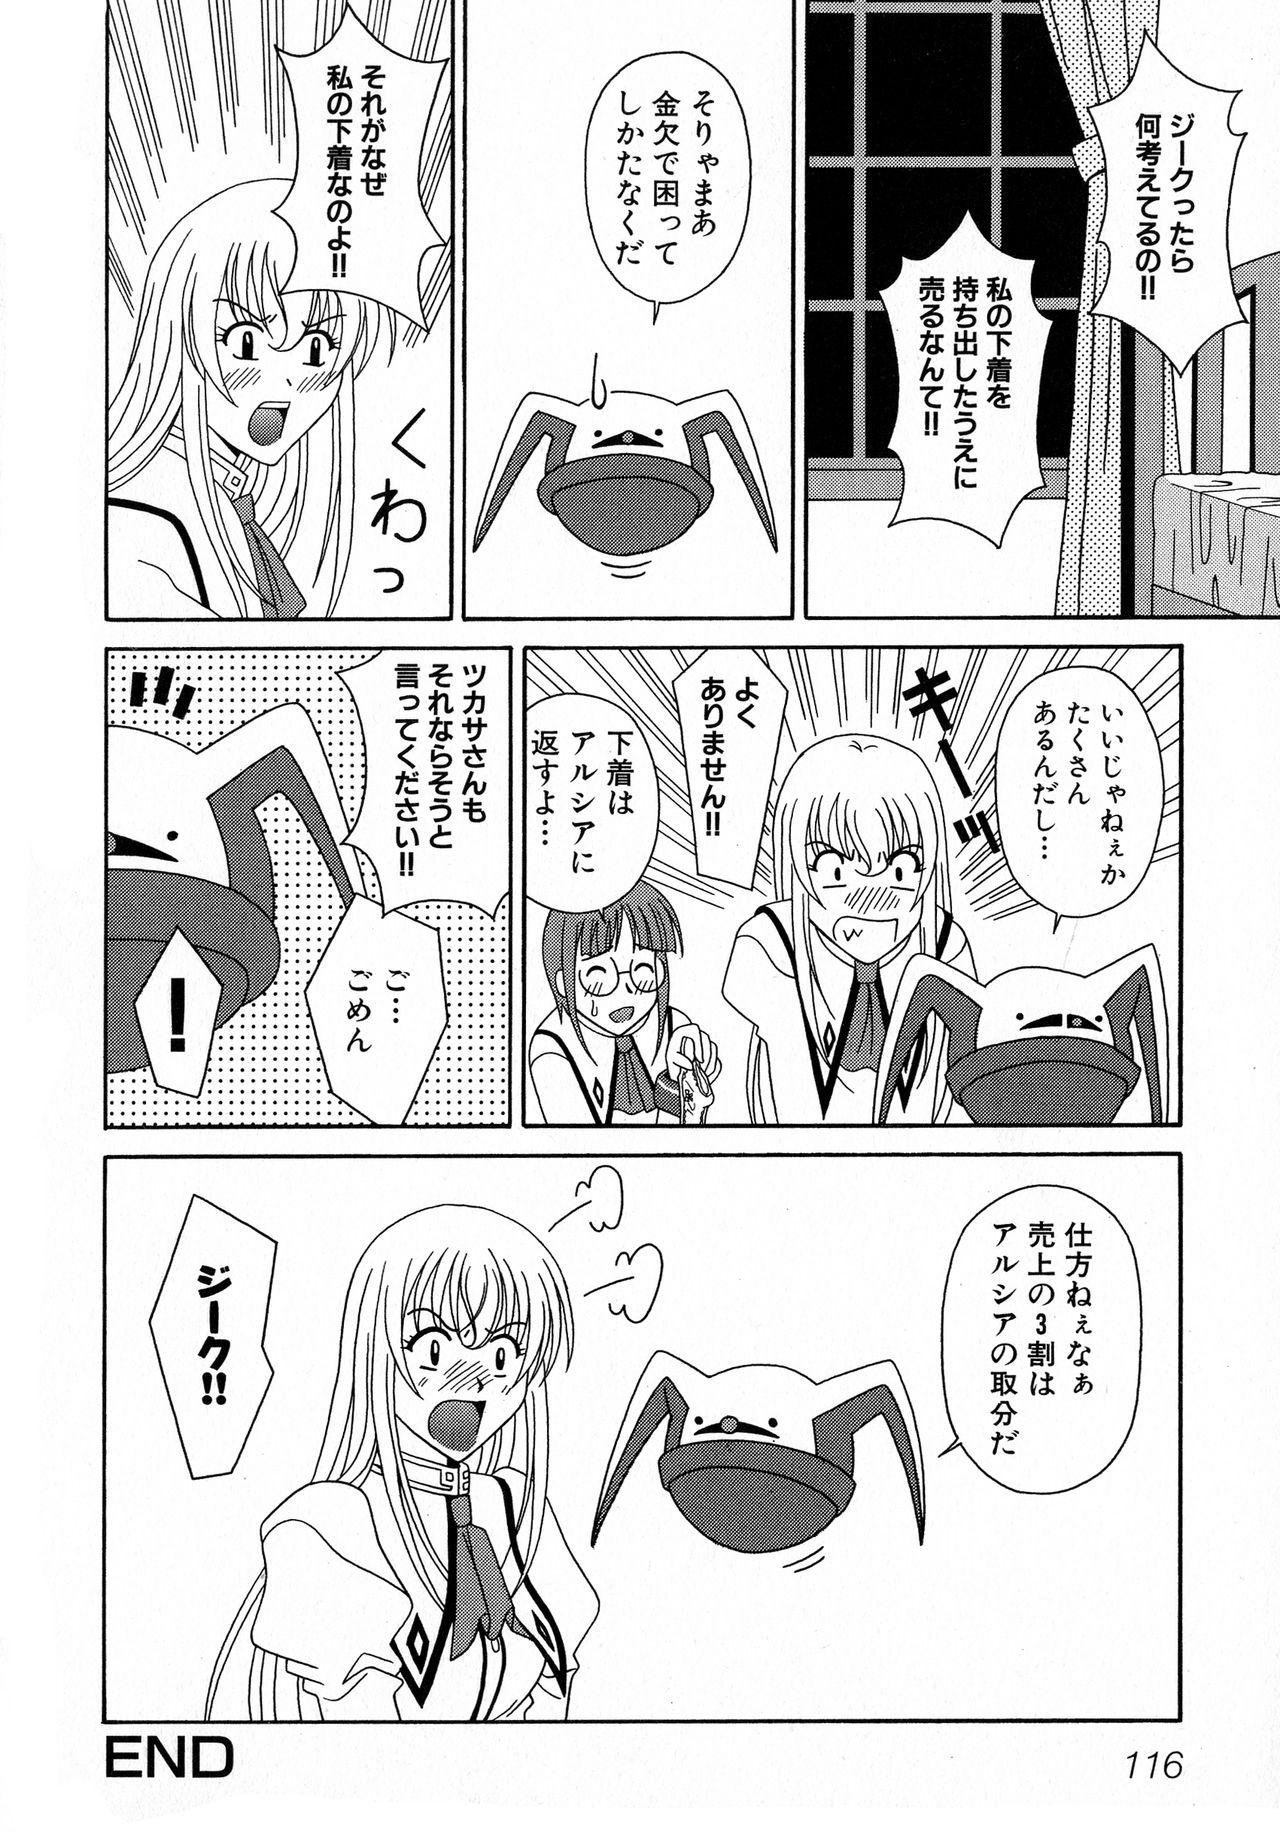 MAGICAL WITCH ACADEMY 116